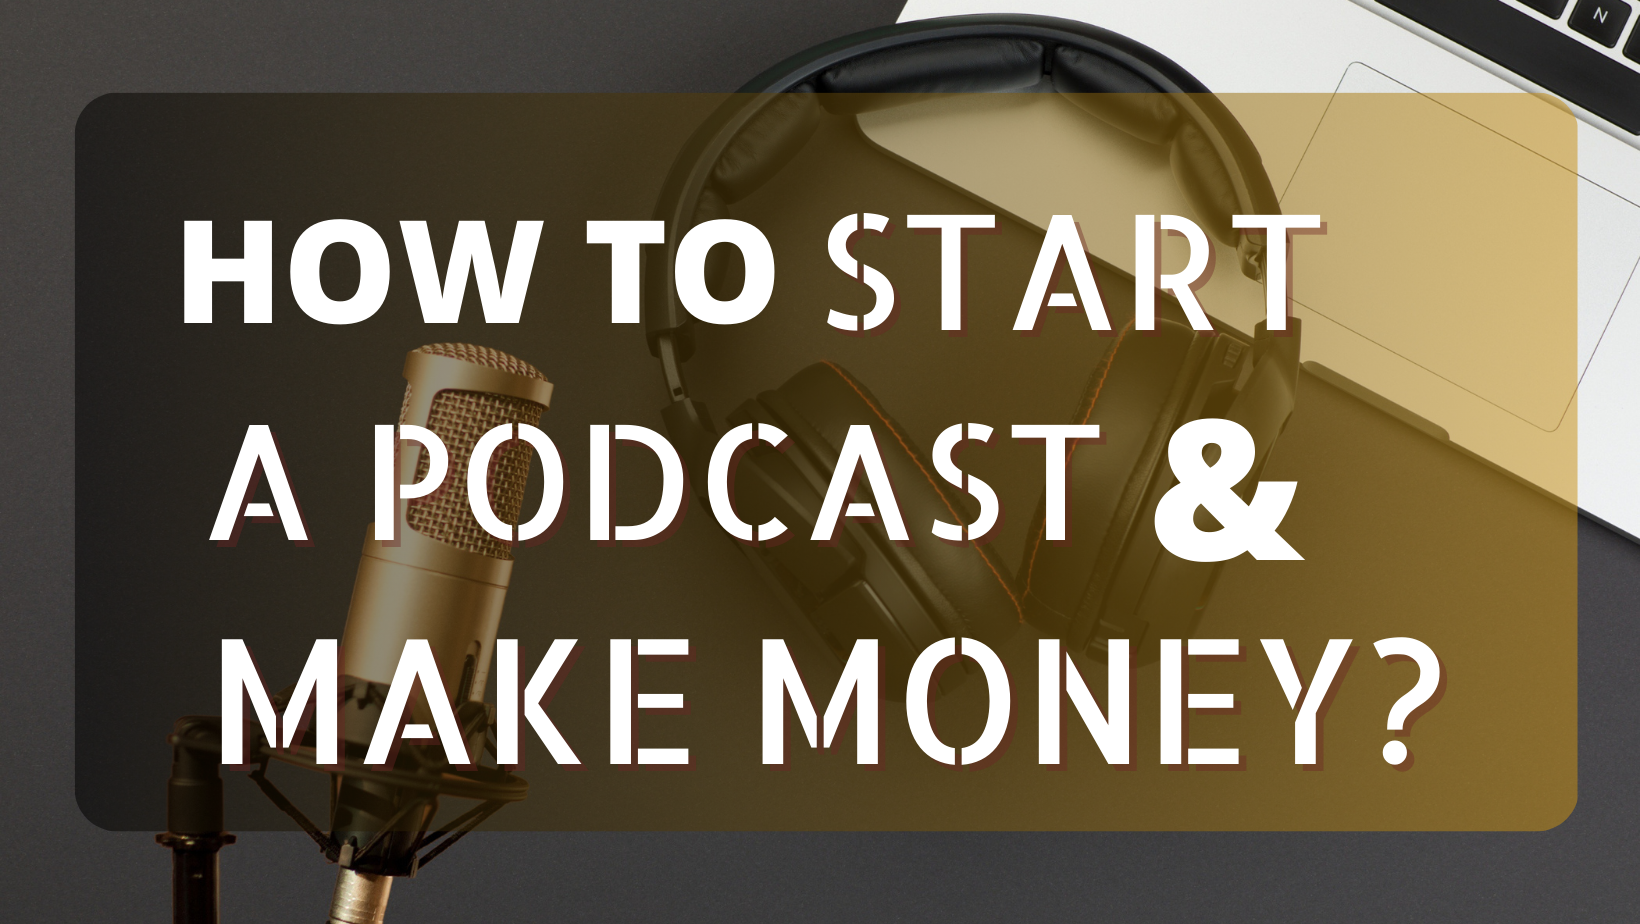 How To Start A Podcast And Make Money?